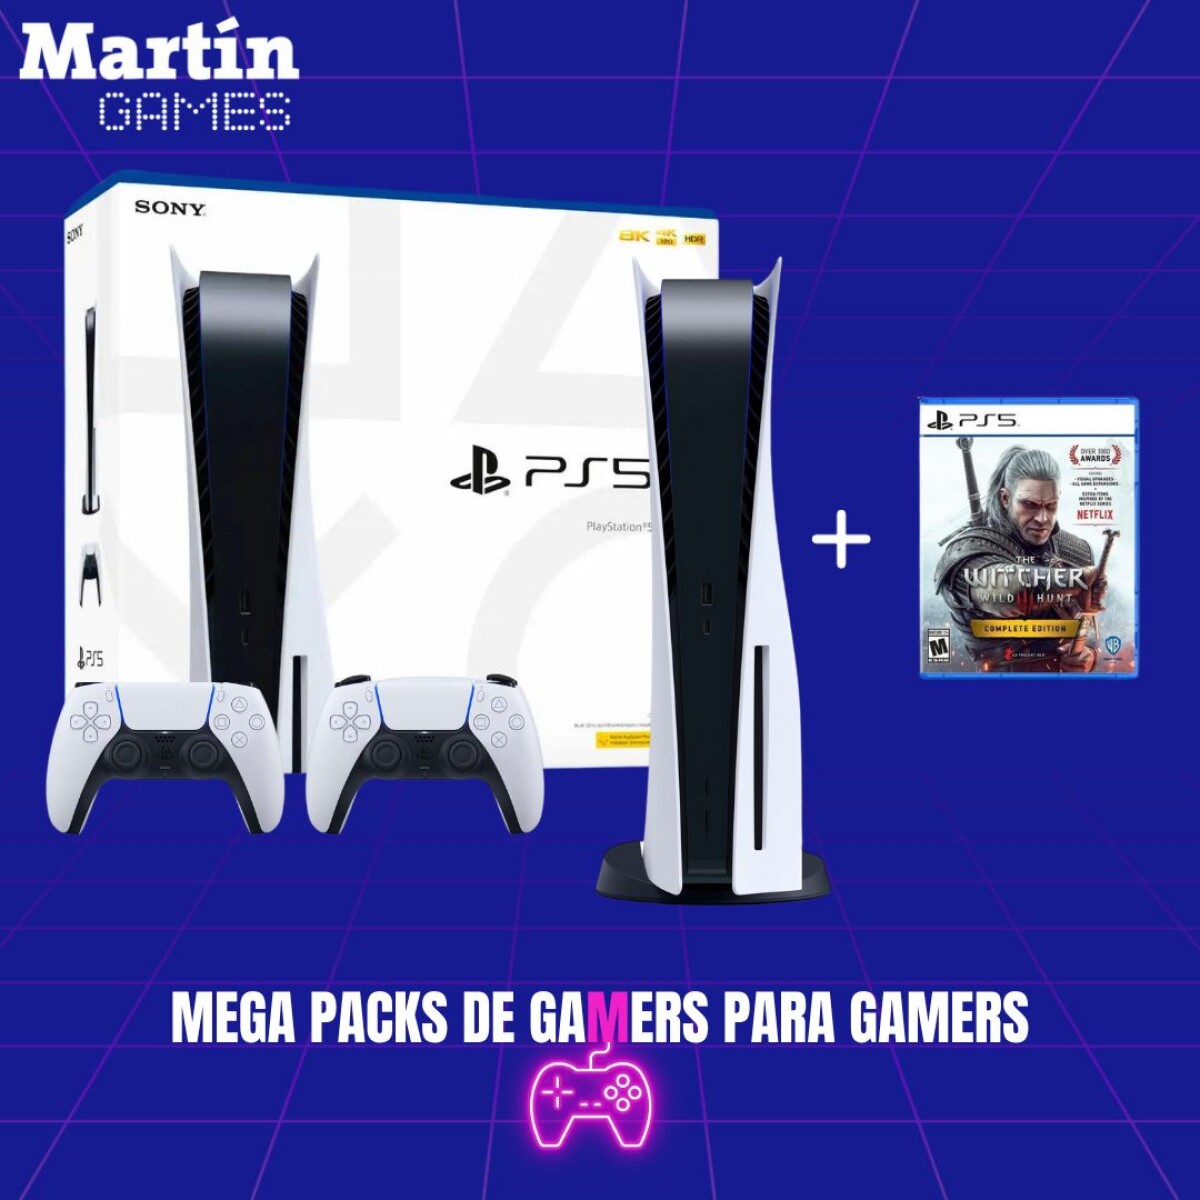 PS5 PLAYSTATION 5 SLIM 0KM CON LECTORA + THE WITCHER 3 + JOYSTICK EXTRA 